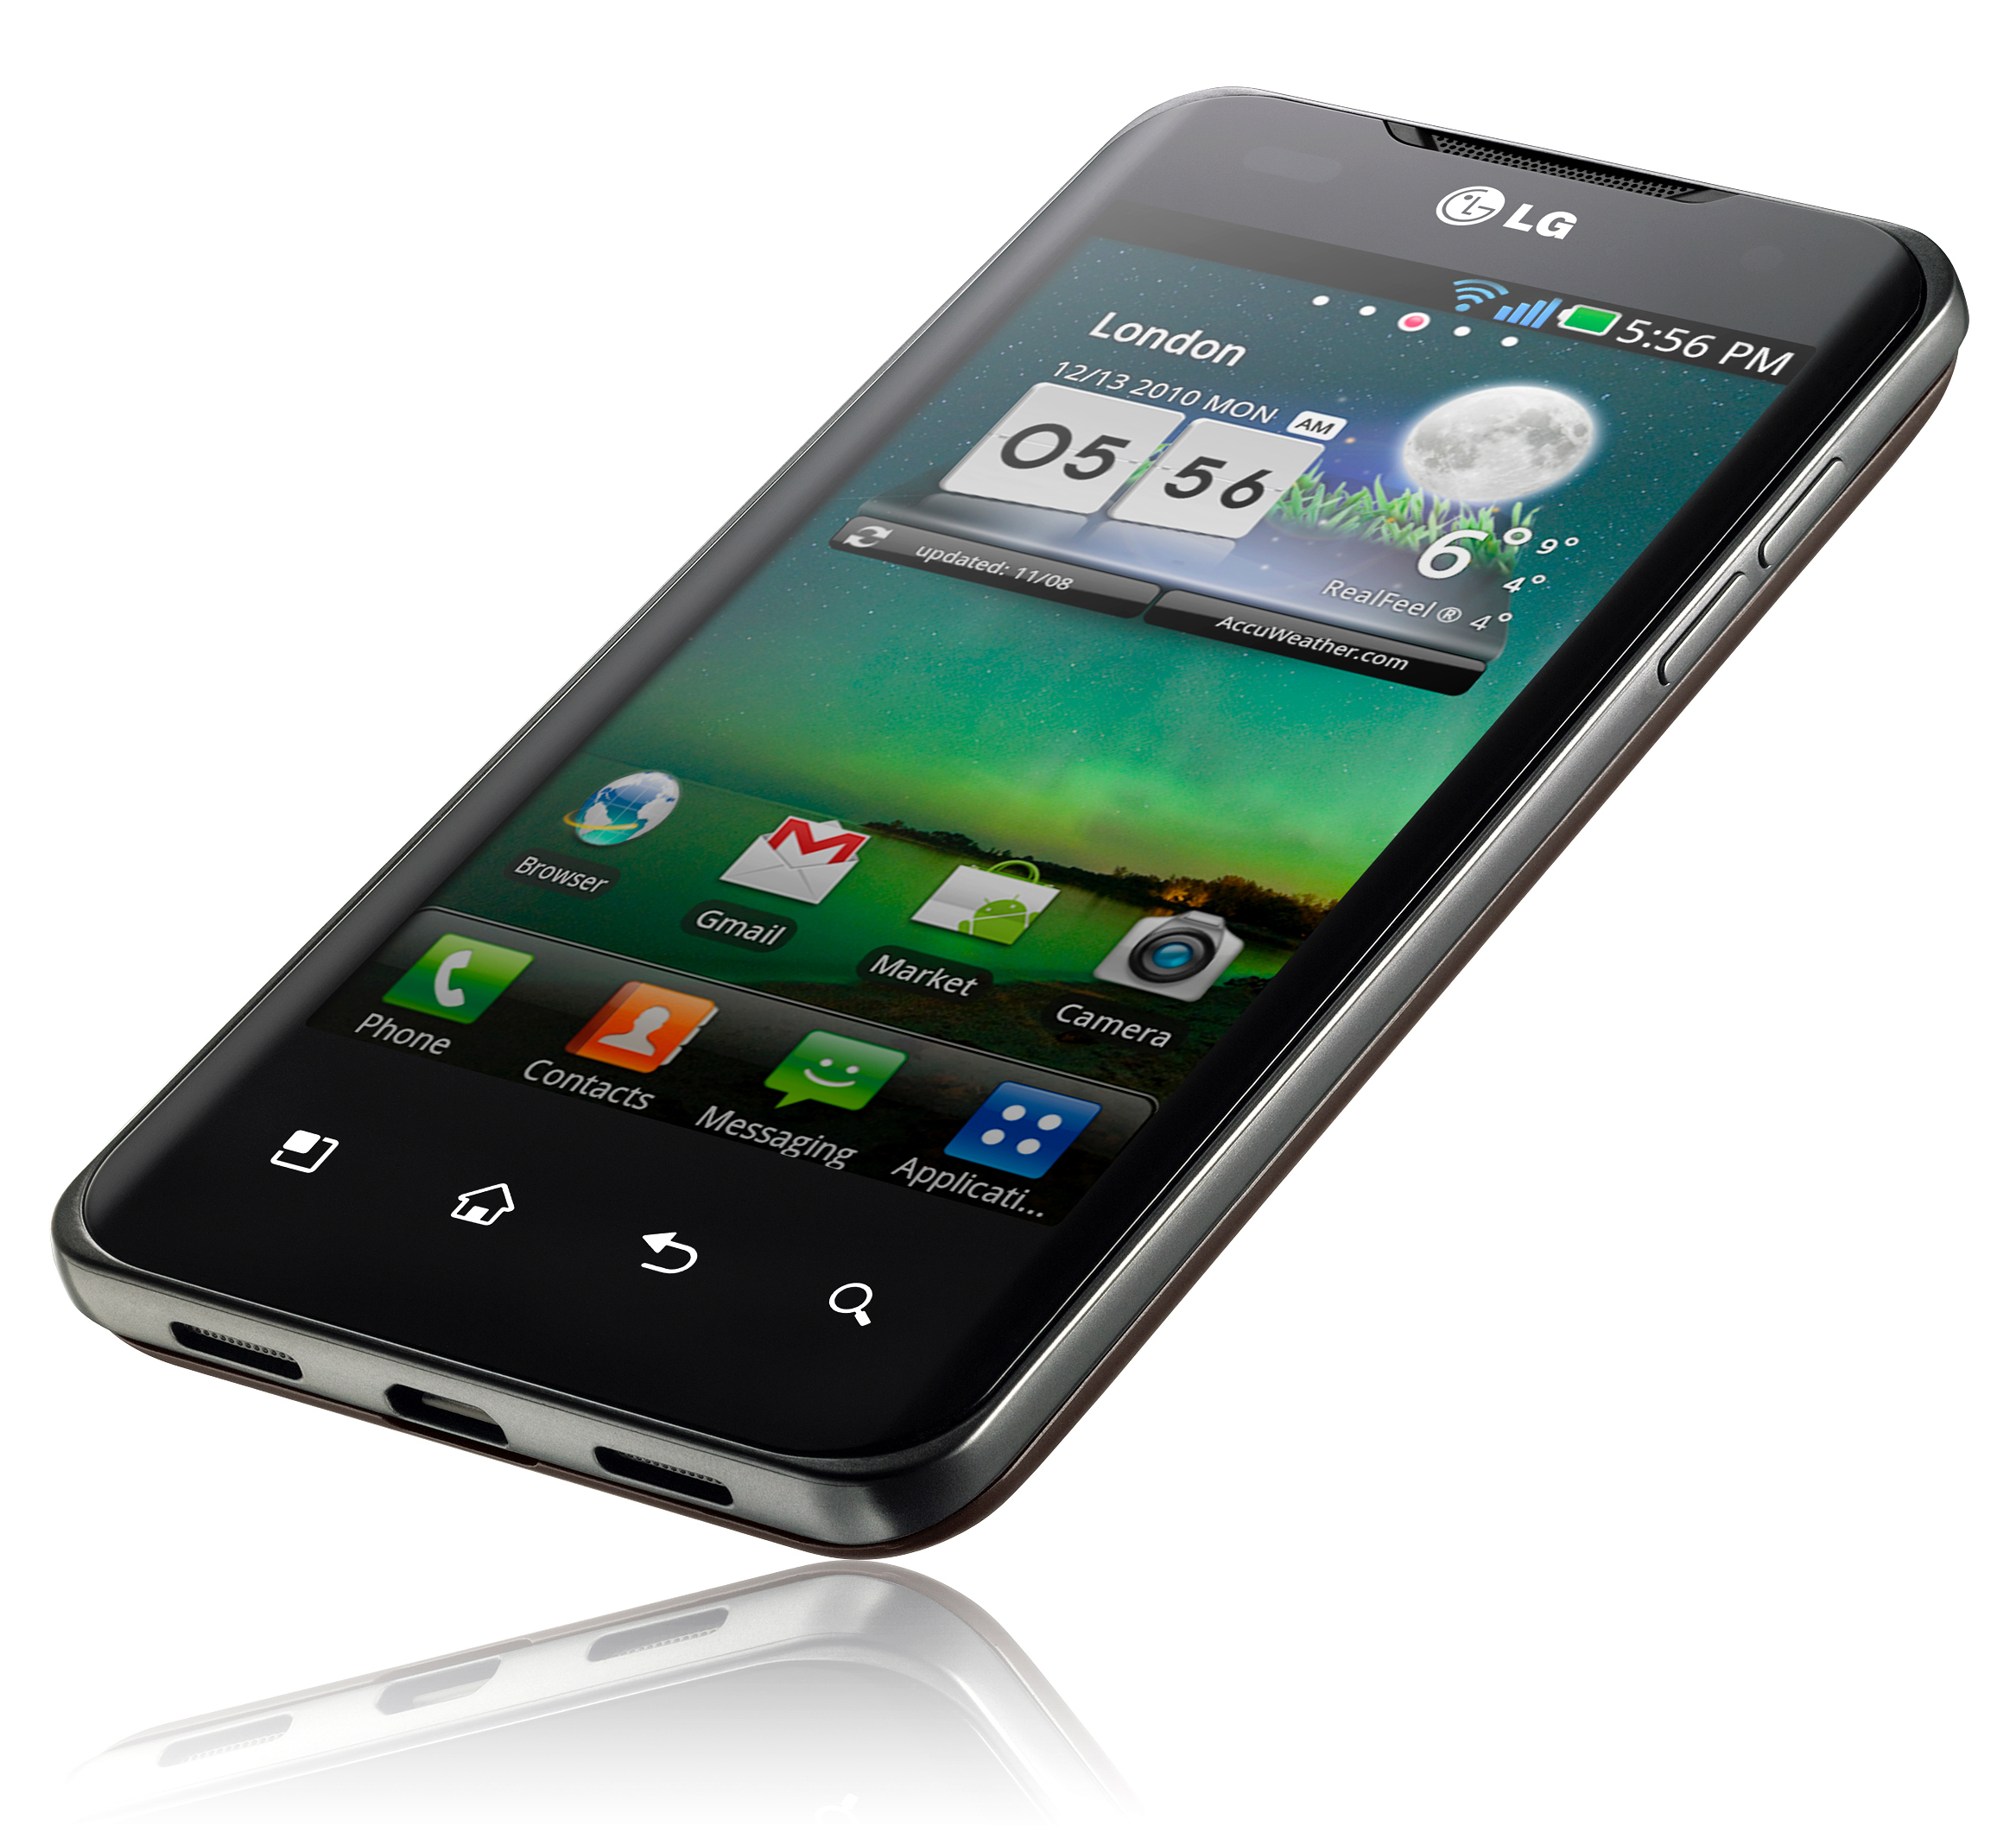 http://www.techwench.com/wp-content/uploads/2011/03/Six-Upcoming-High-End-Android-SmartPhone-on-Spring-2011-6.jpg